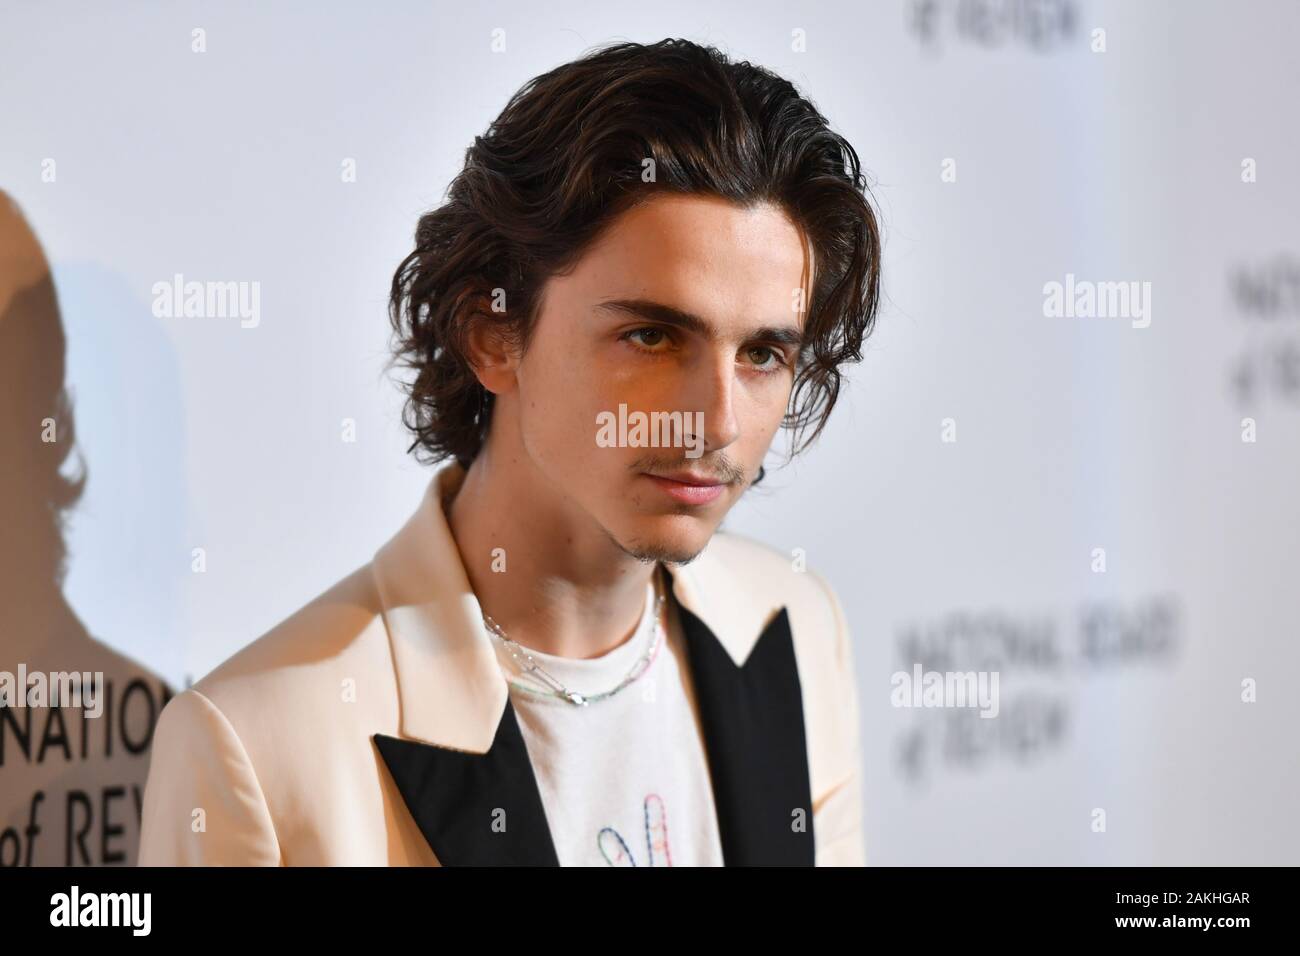 Timothee Chalamet attends the 2020 National Board Of Review Gala on January 08, 2020 in New York City. Stock Photo